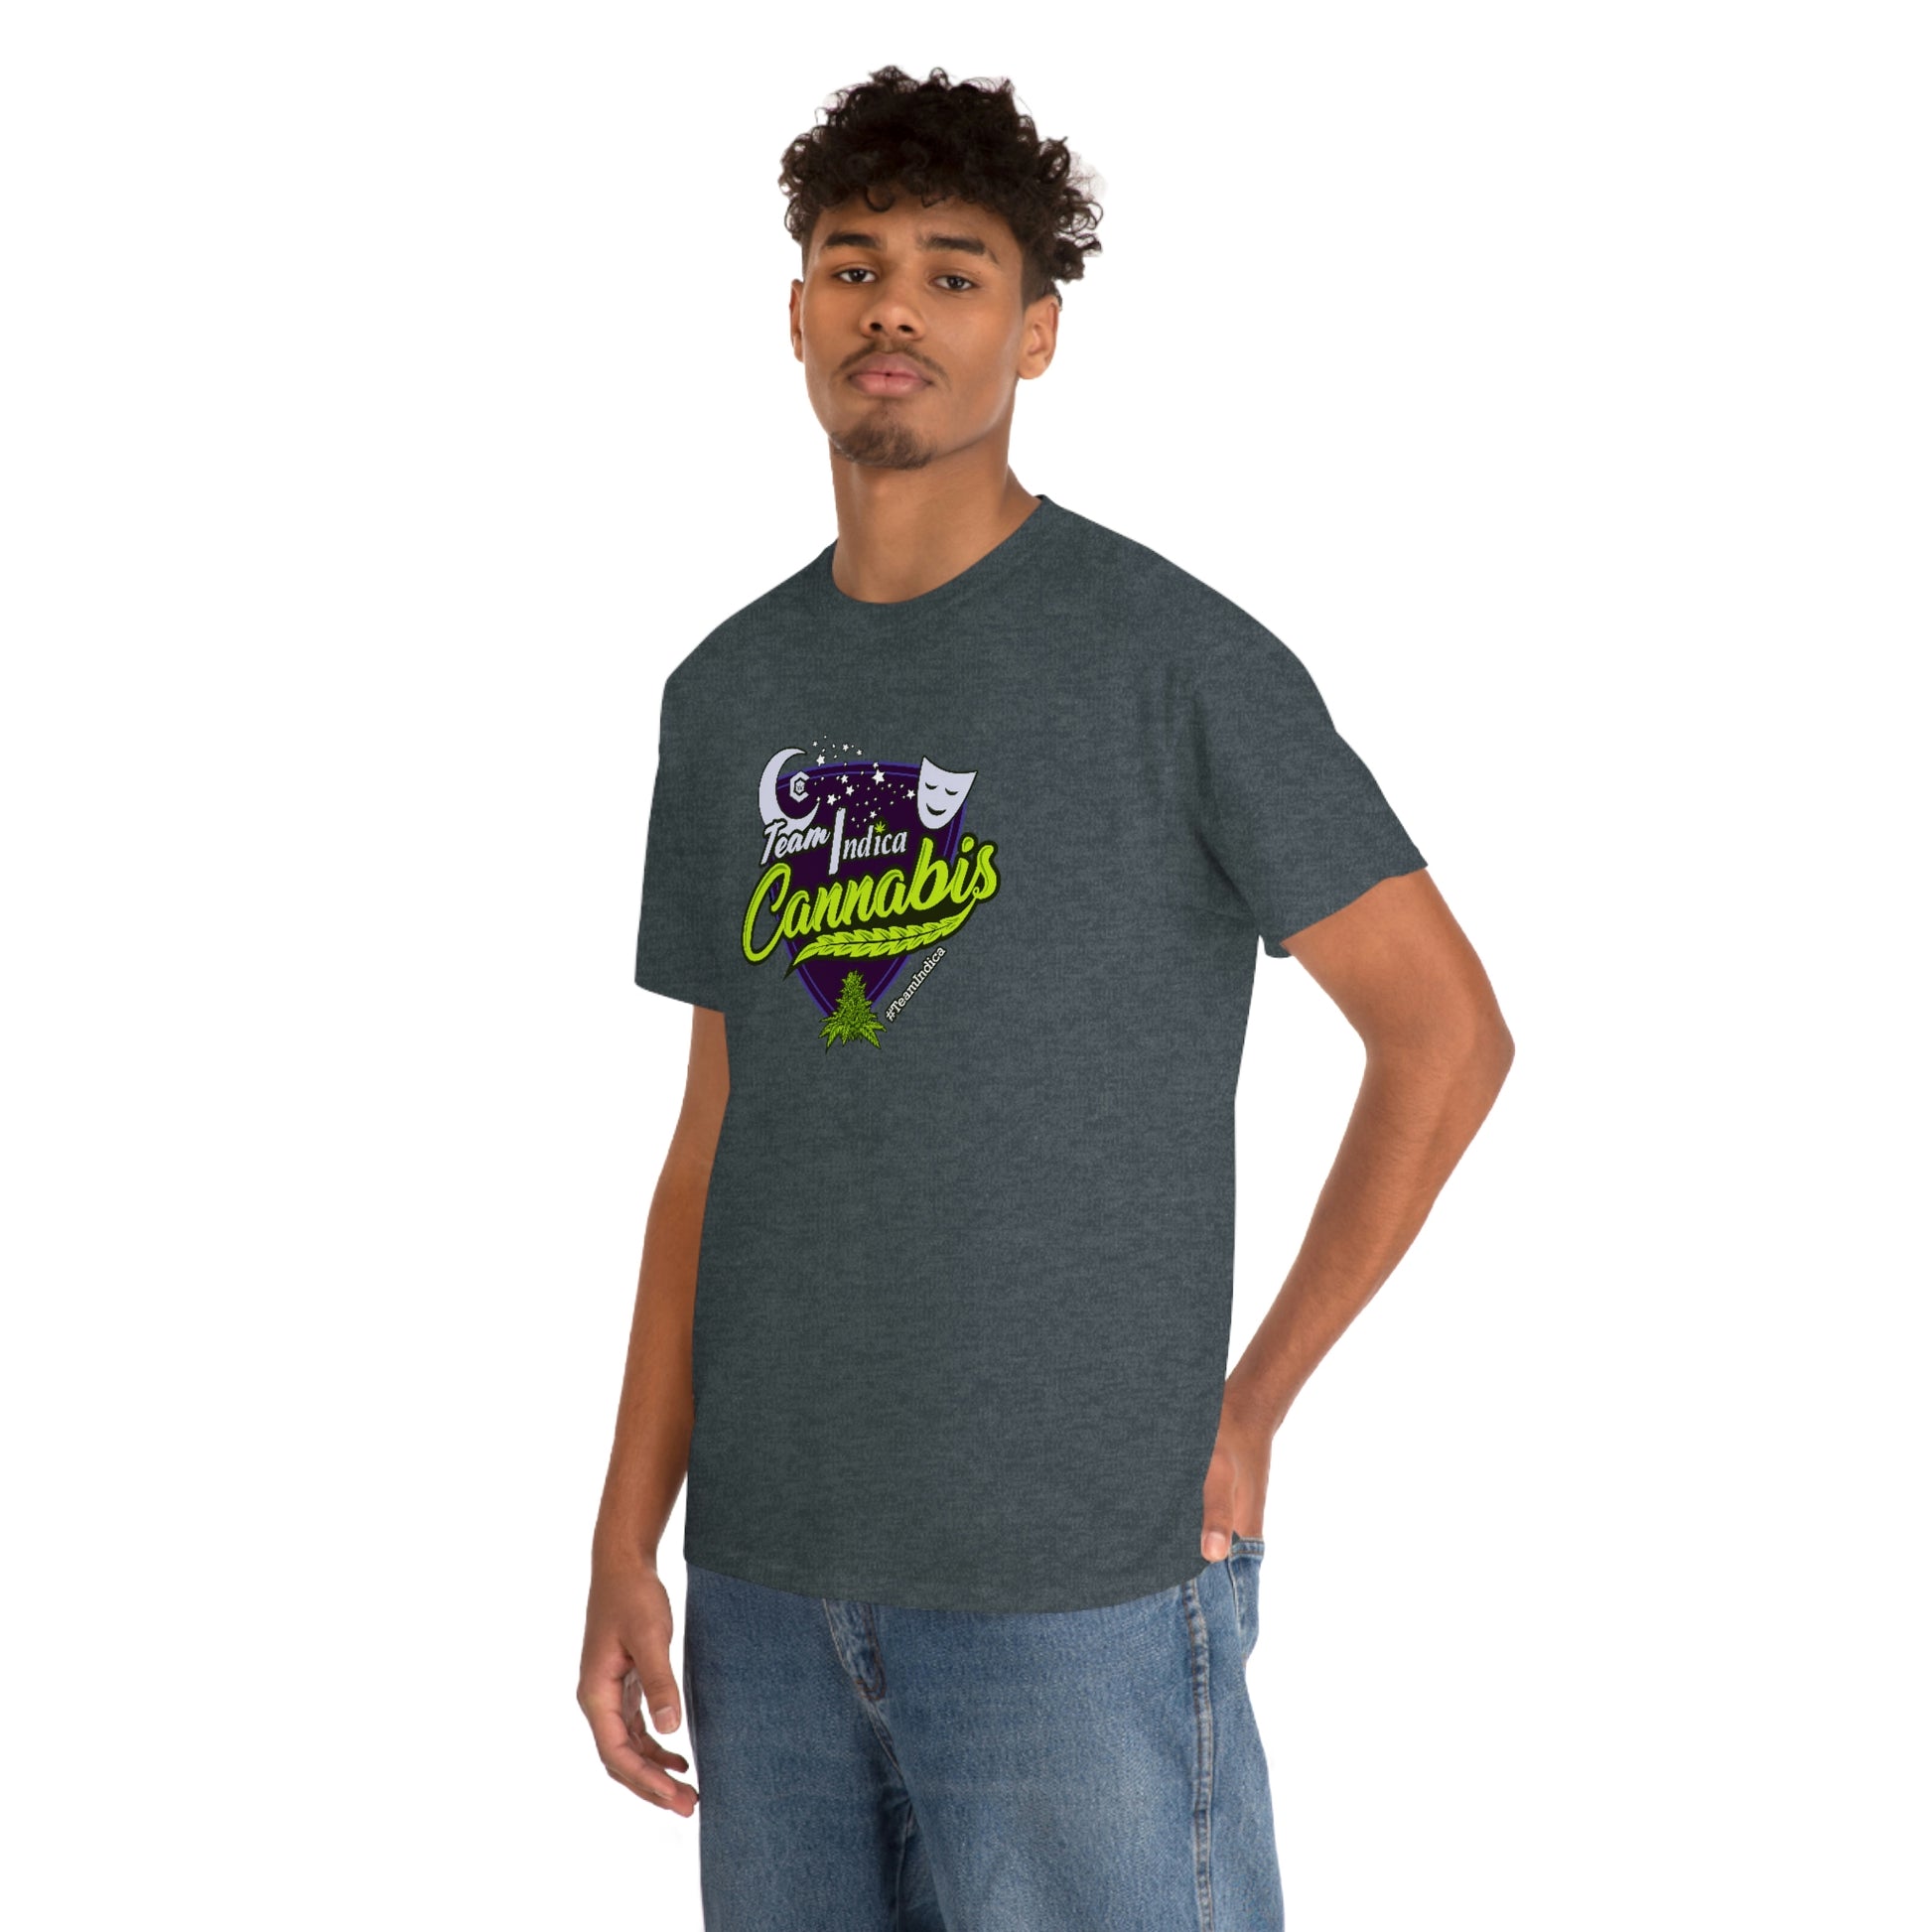 a man wearing a Team Indica Cannabis T-Shirt with a purple and green logo.